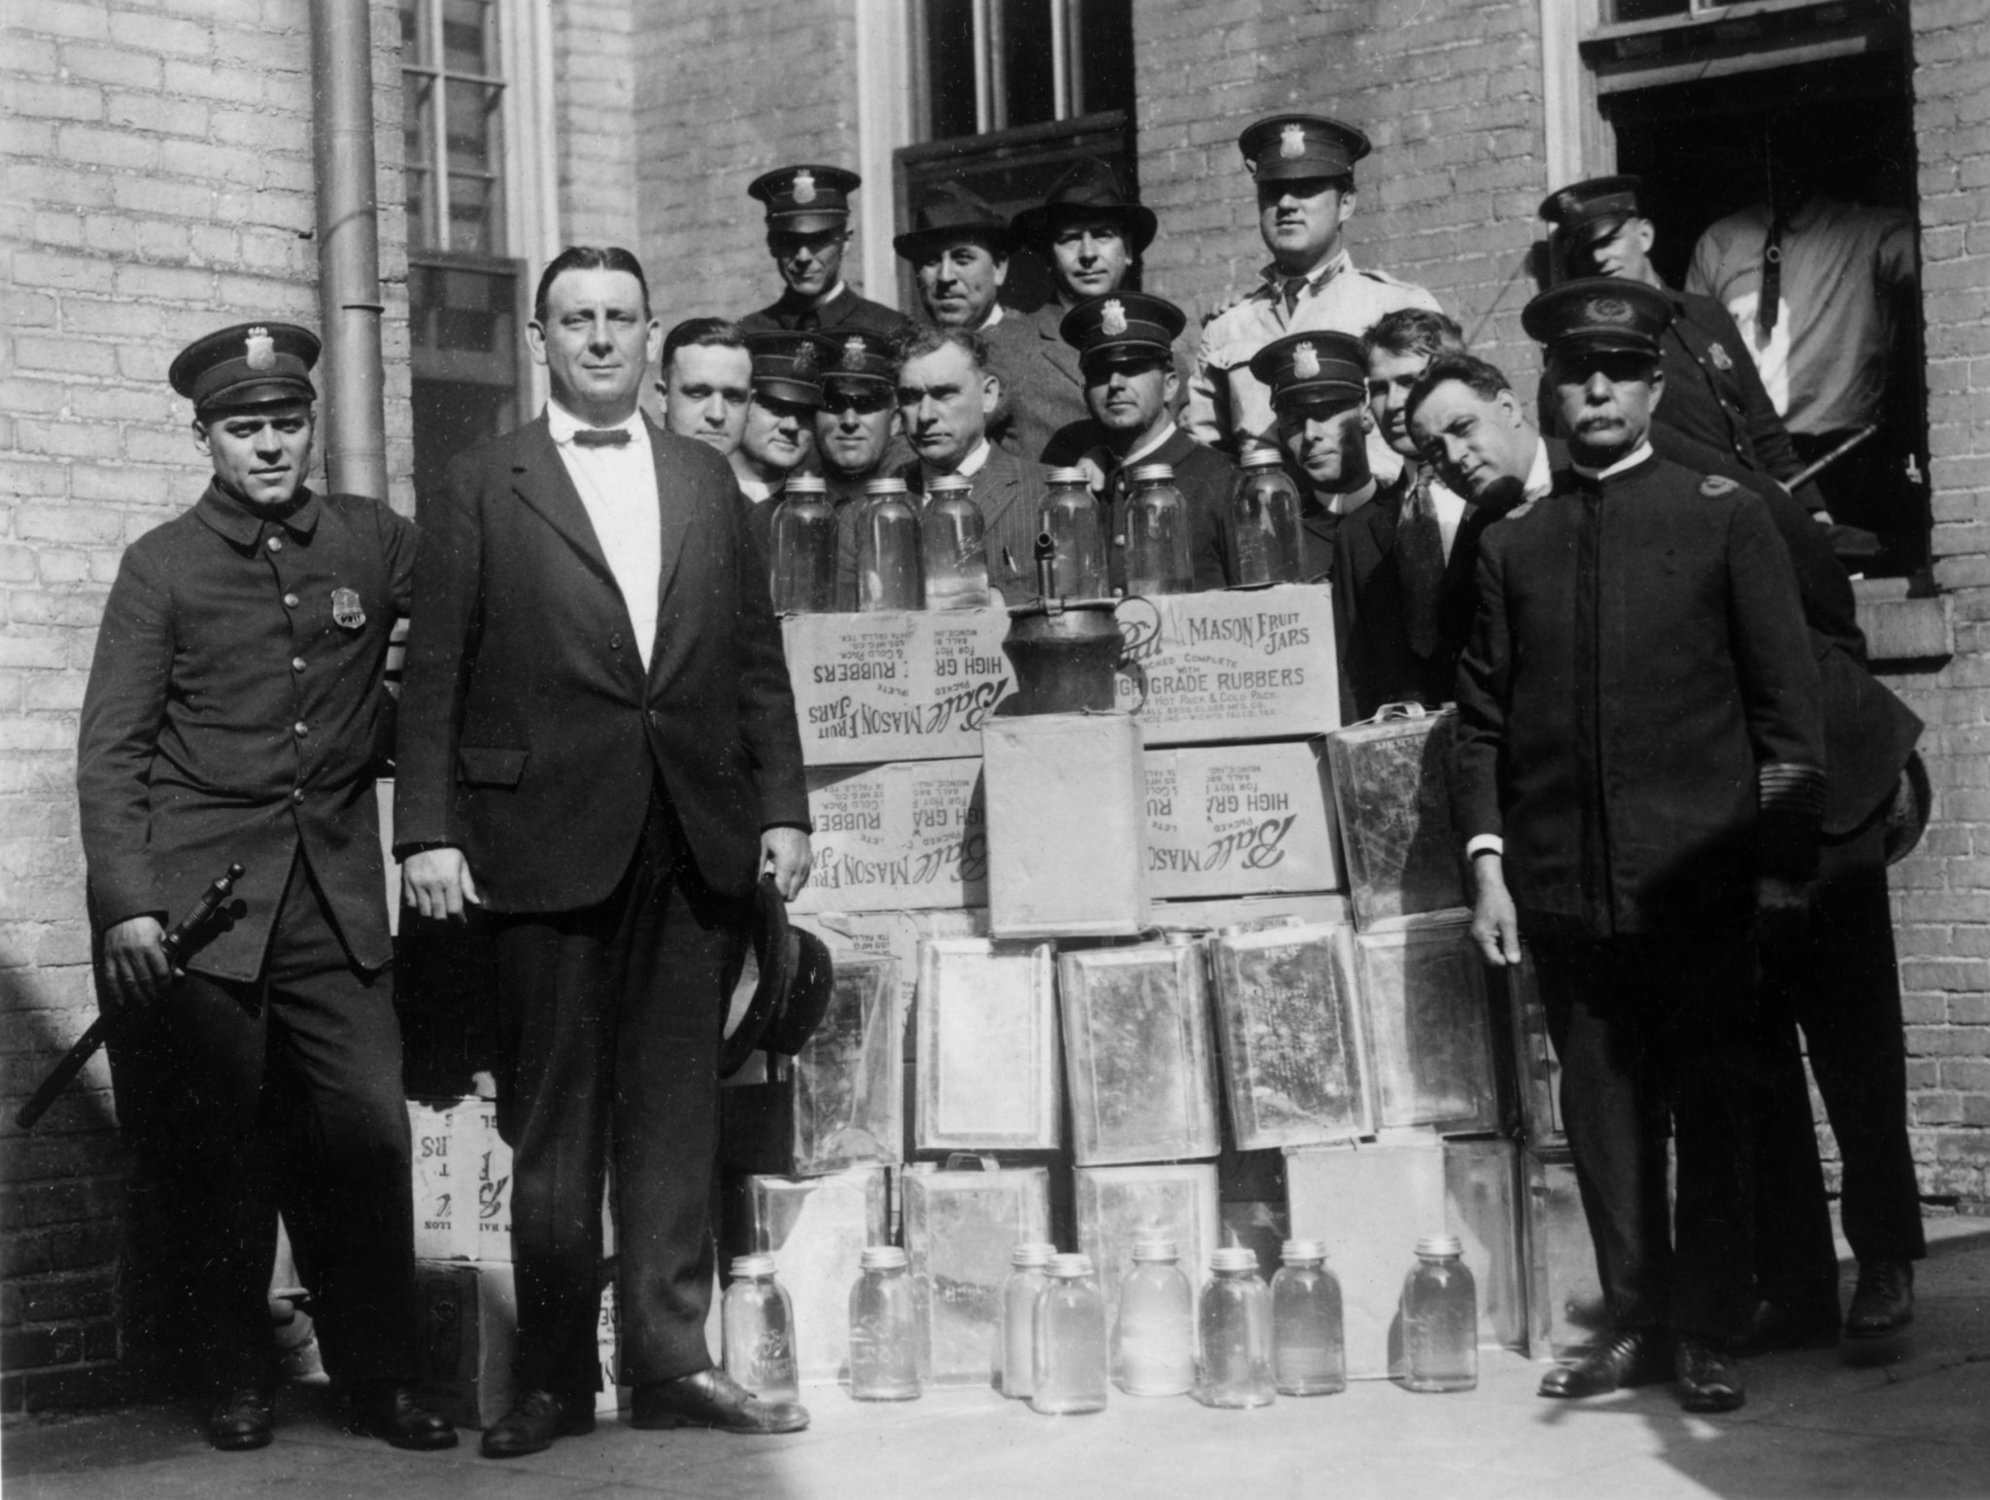 Group portrait of a police department liquor squad posing outdoors with cases of confiscated alcohol and distilling equipment during Prohibition.  (Photo by Archive Photos/Getty Images)